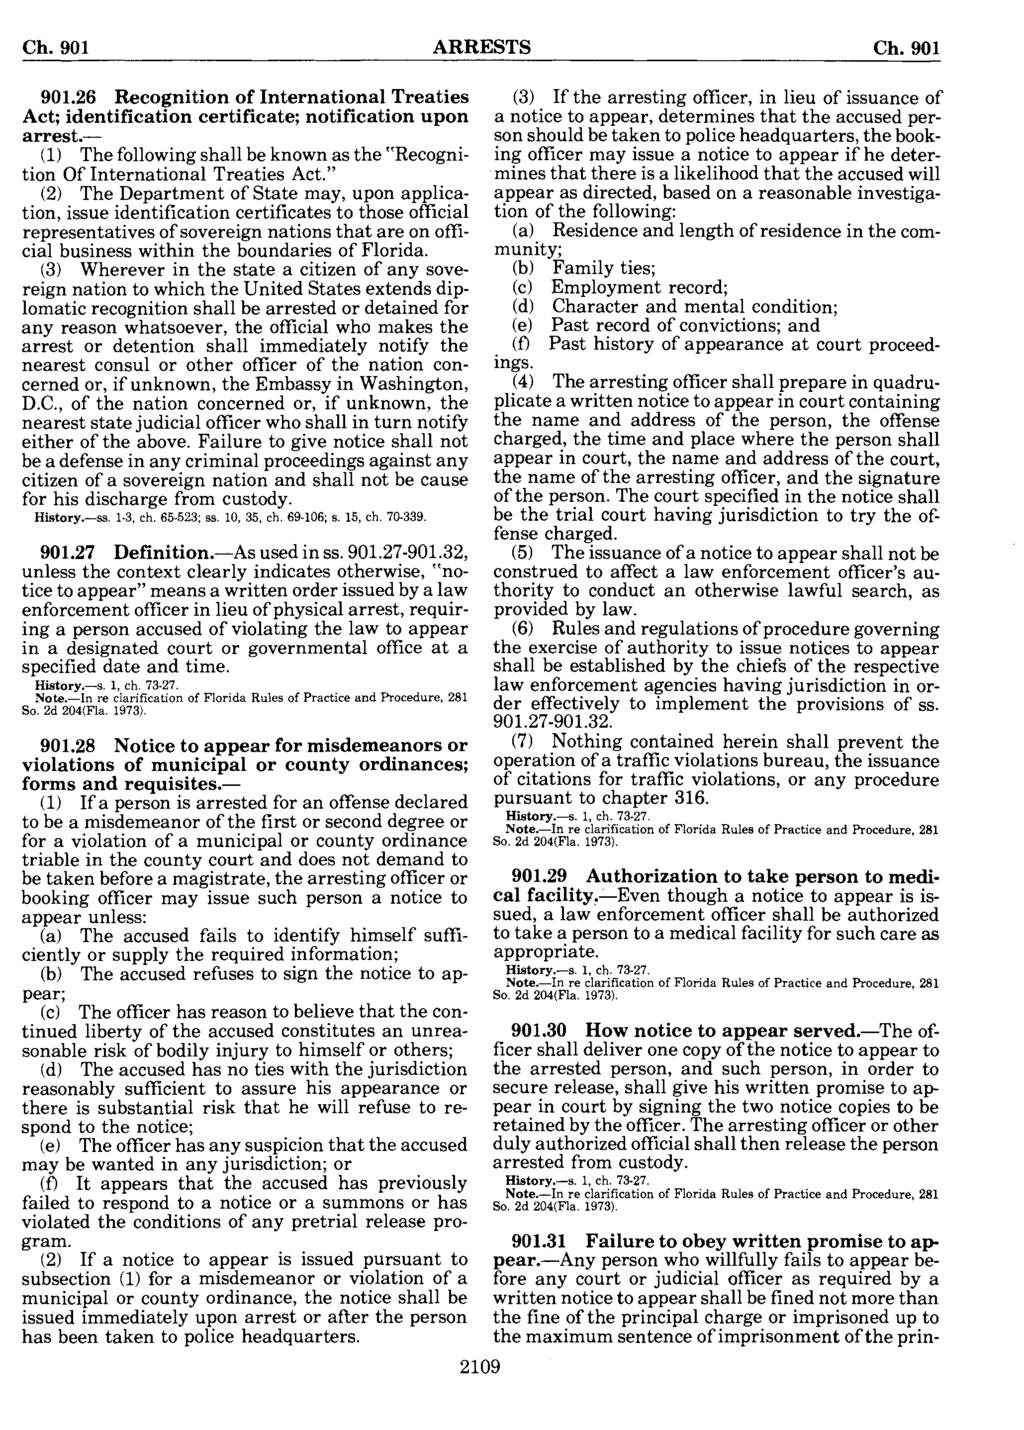 901.26 Recognition of International Treaties Act; identification certificate; notification upon arrest.- (1) The following shall be known as the "Recognition Of International Treaties Act.